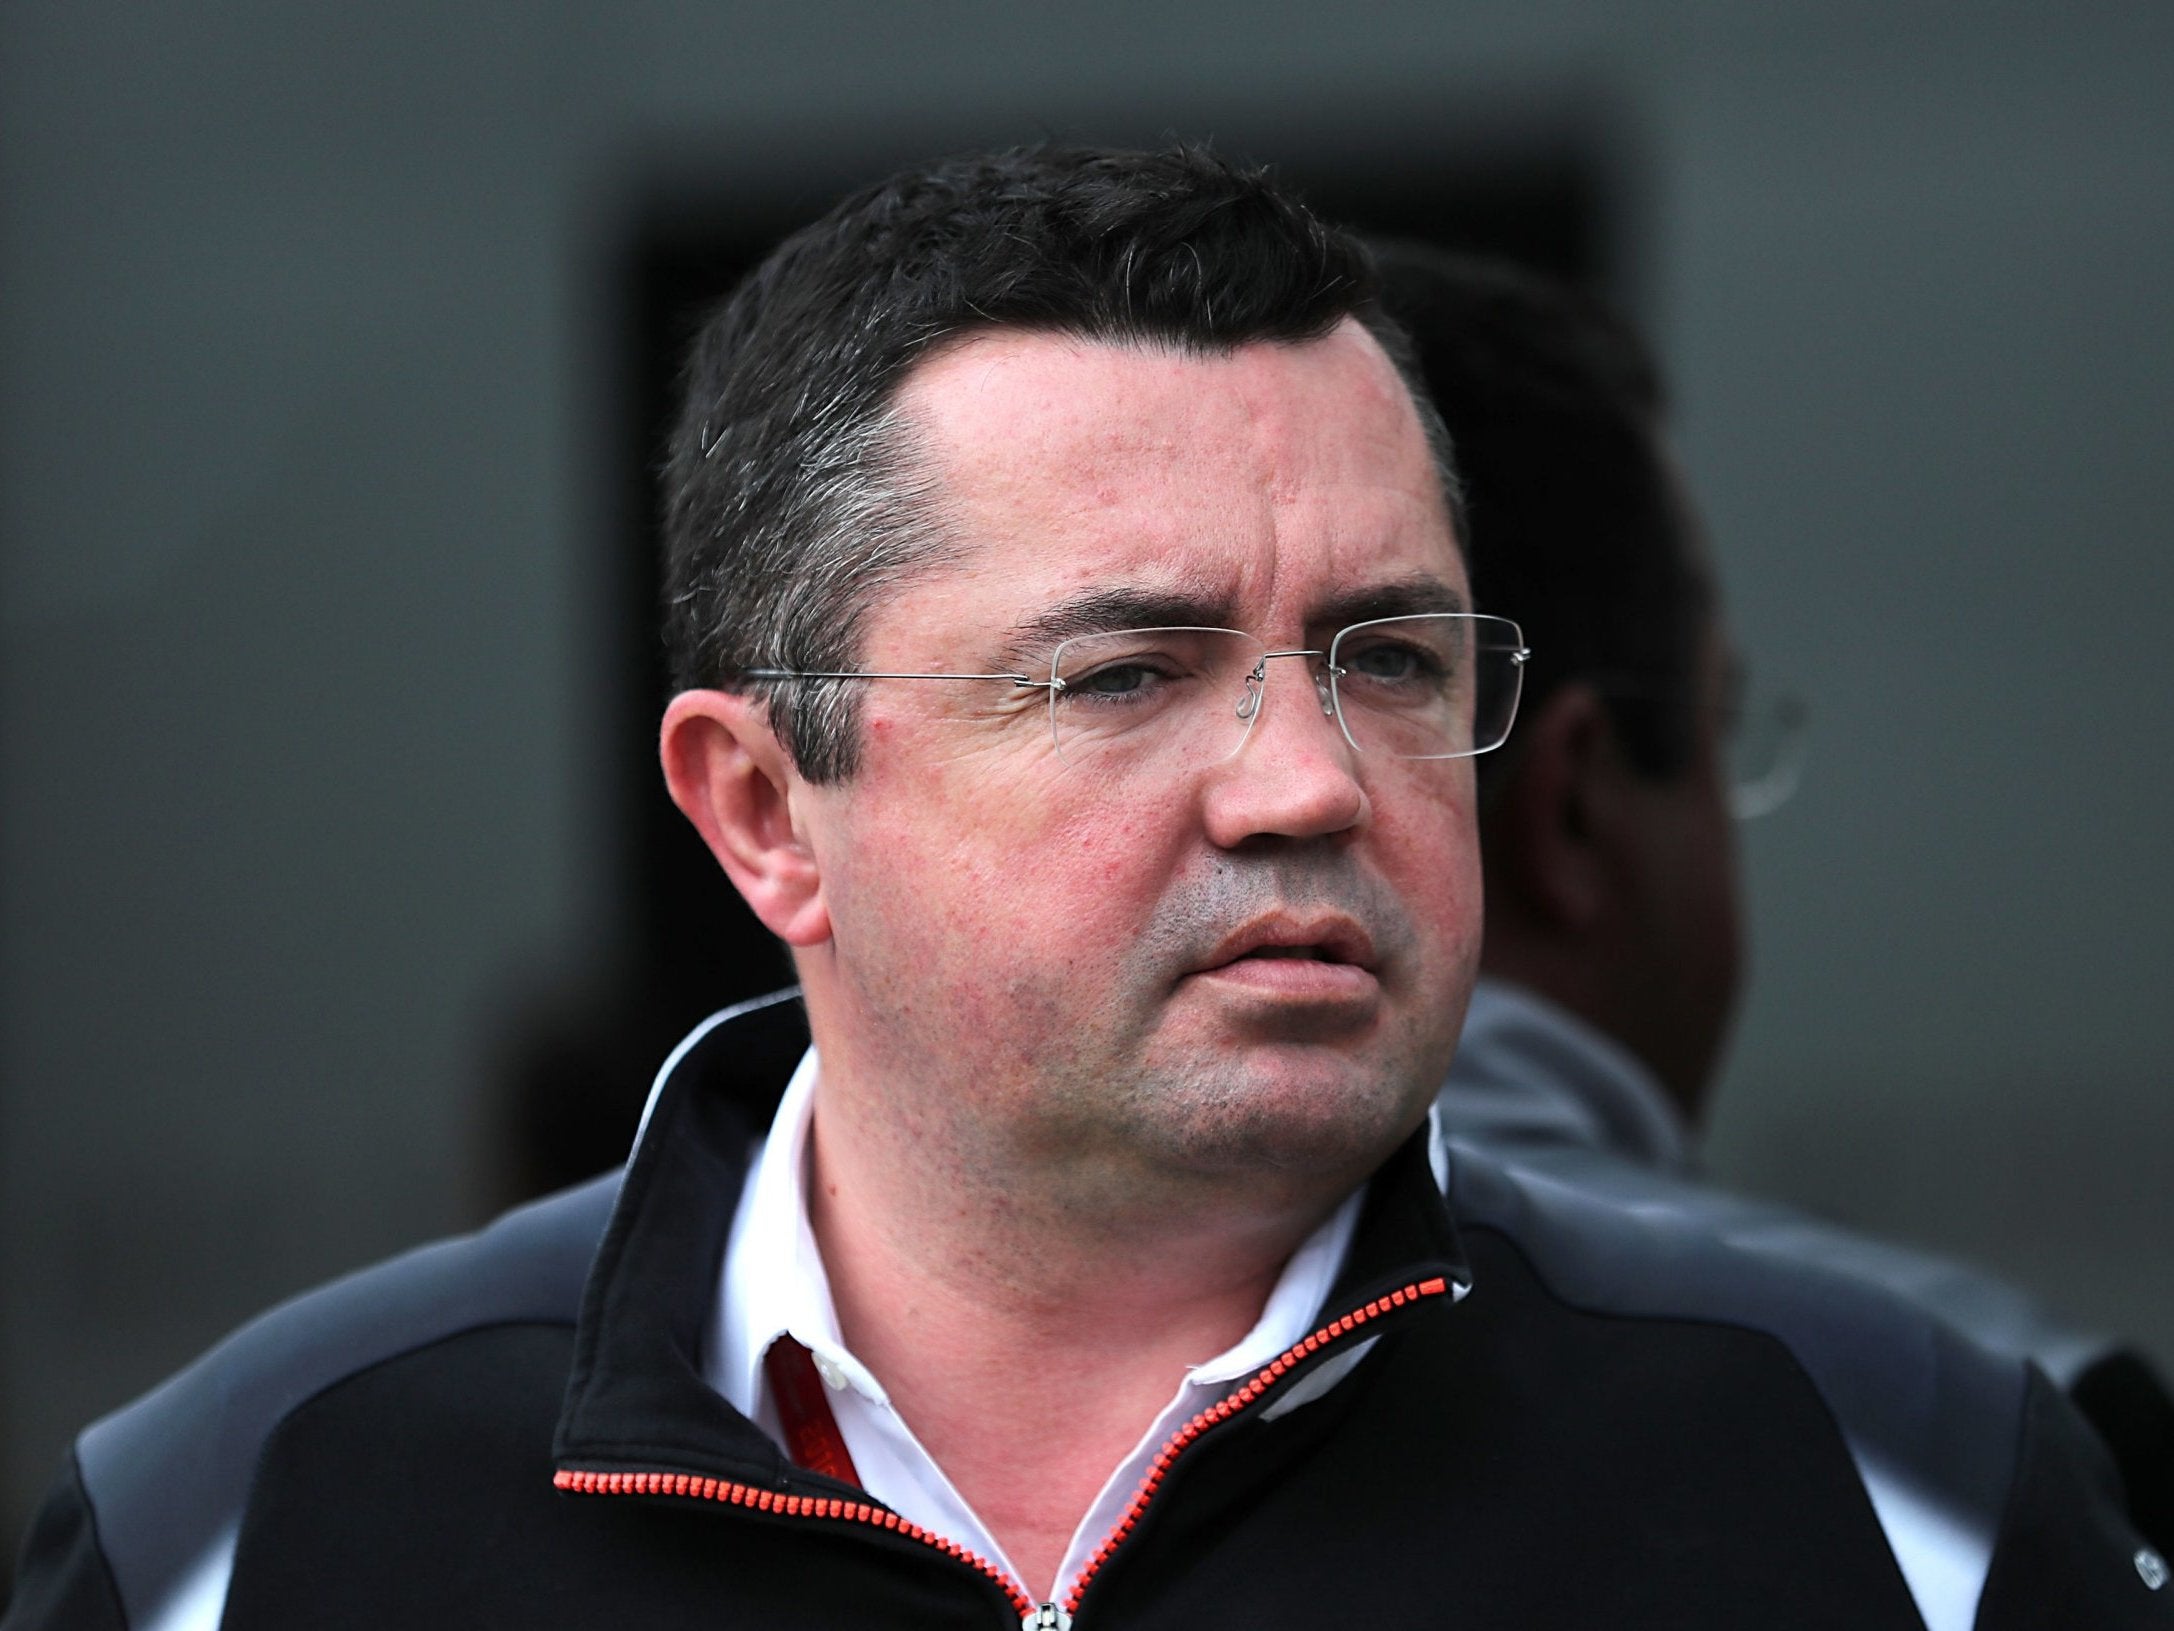 Boullier has resigned with immediate effect